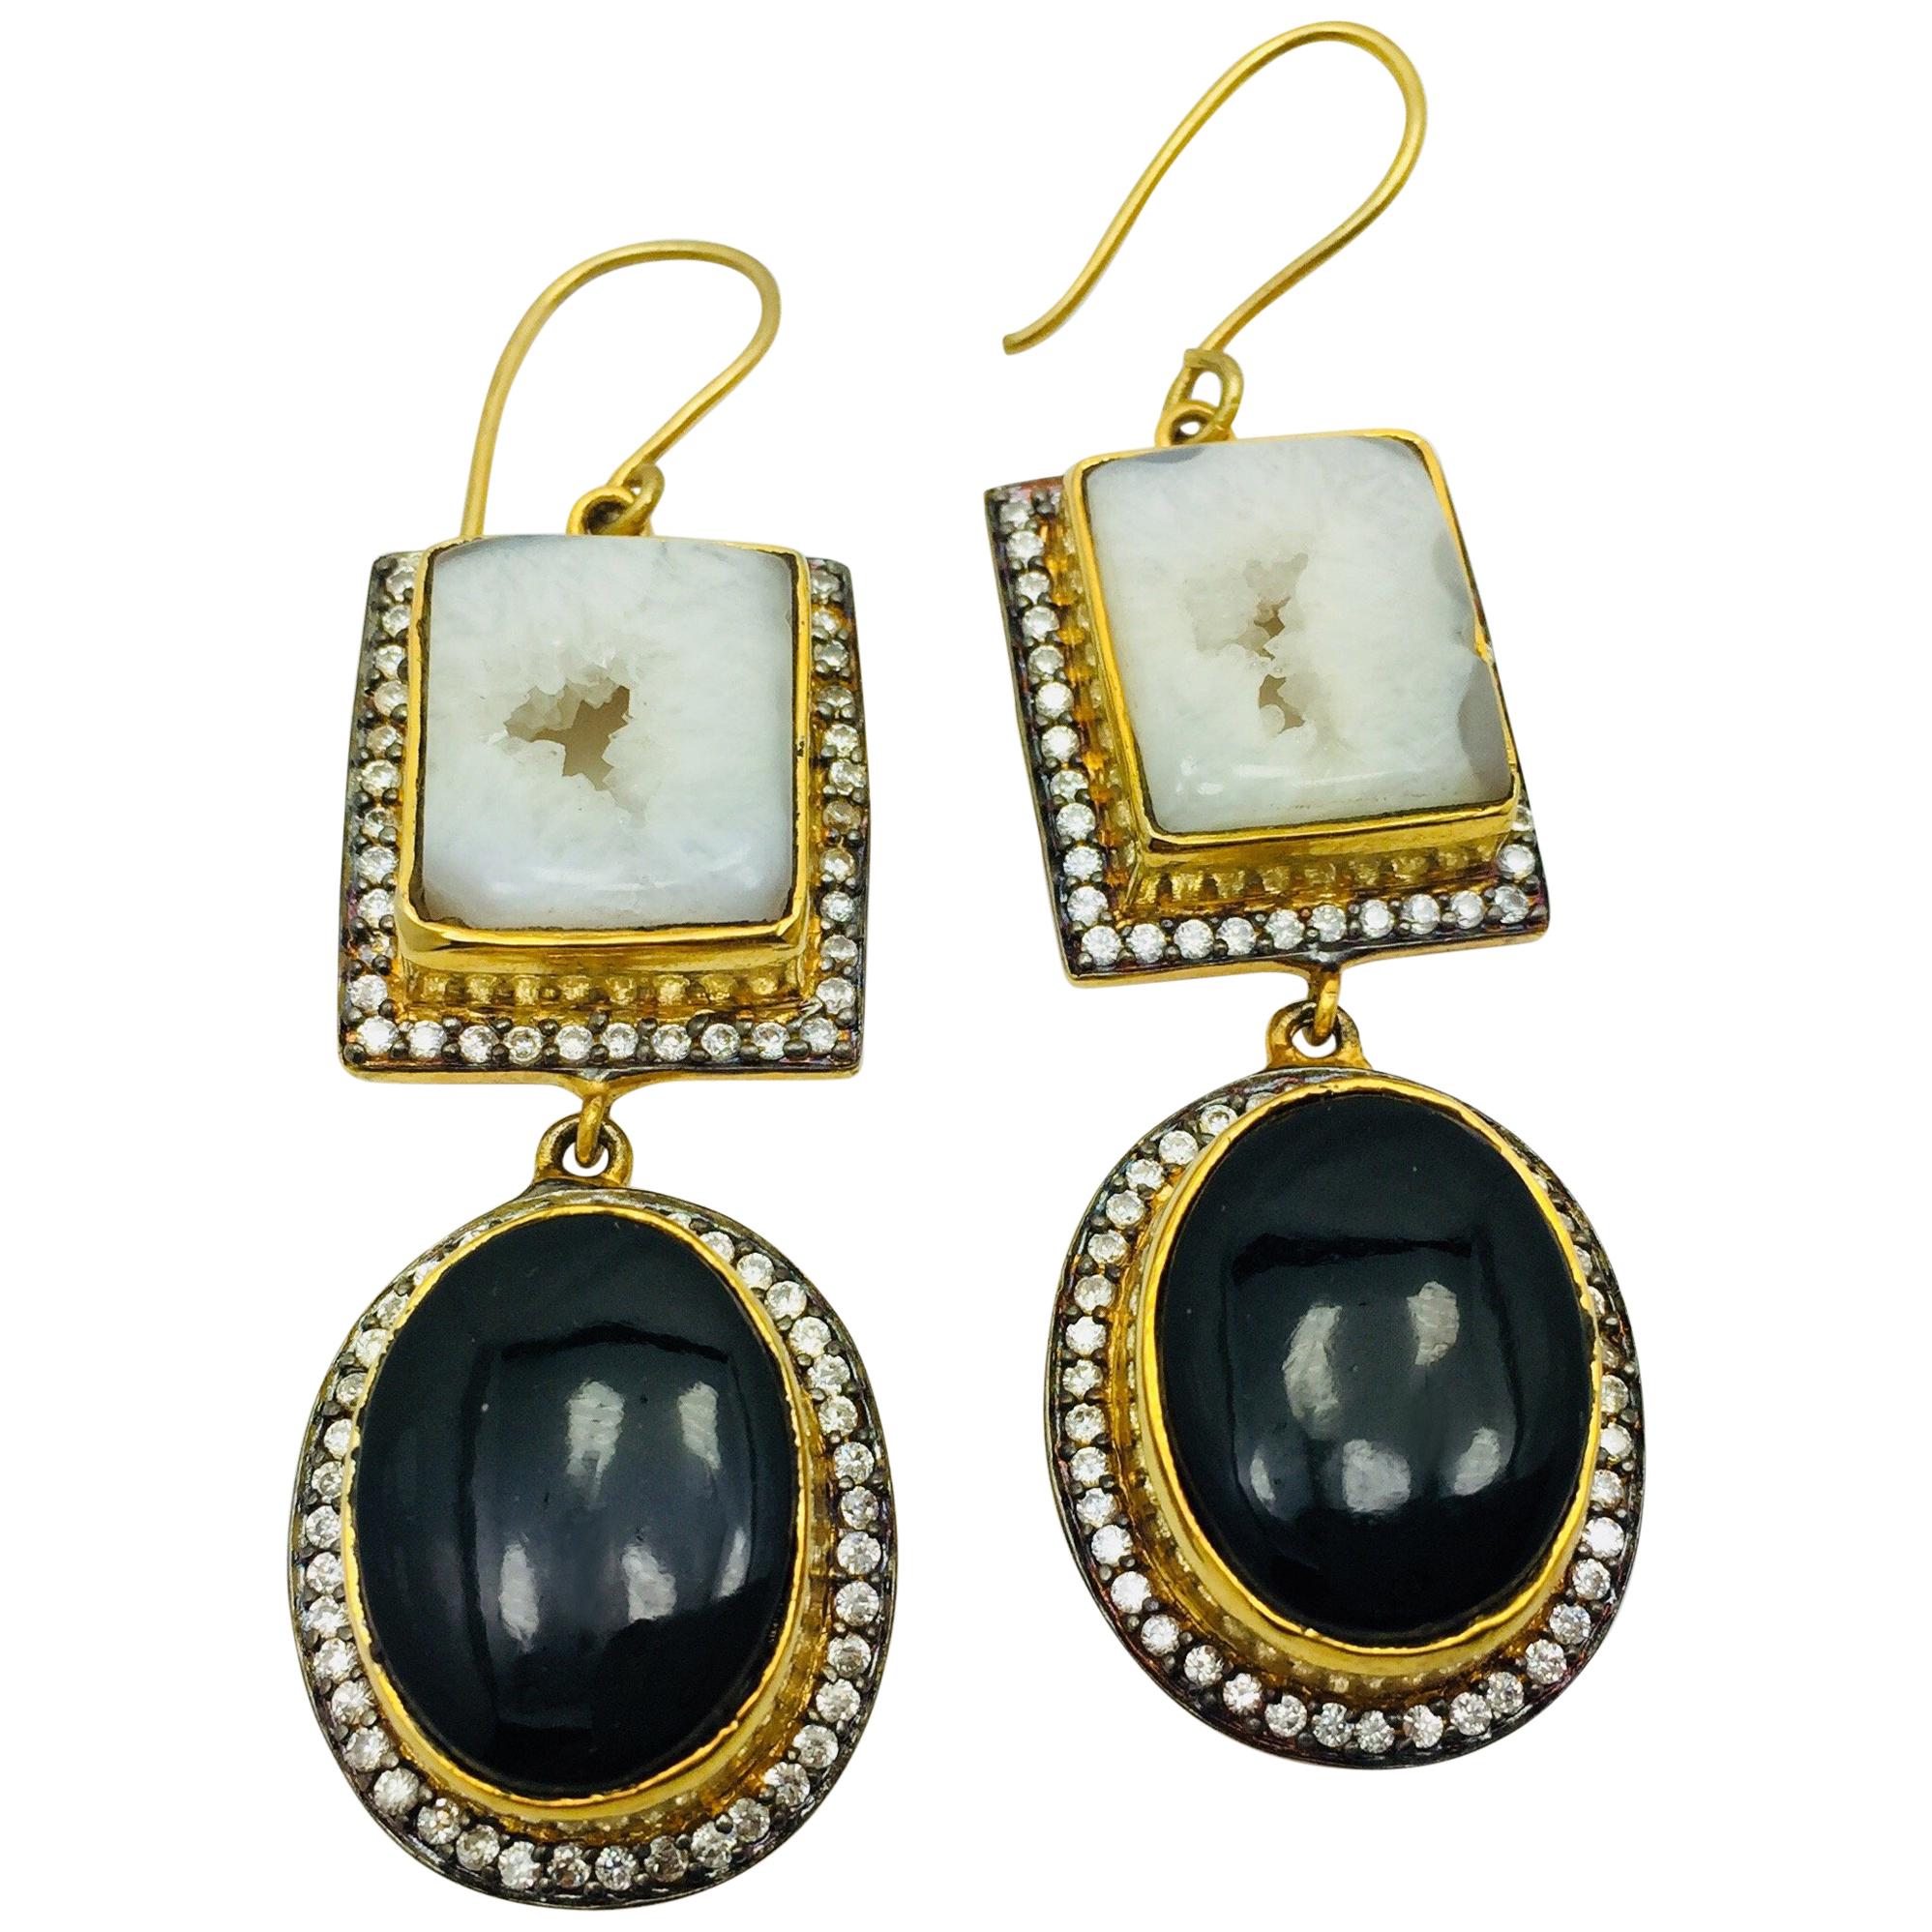 Geode Druzy Black White Drop Earrings . As featured in Oprah Magazine! For Sale